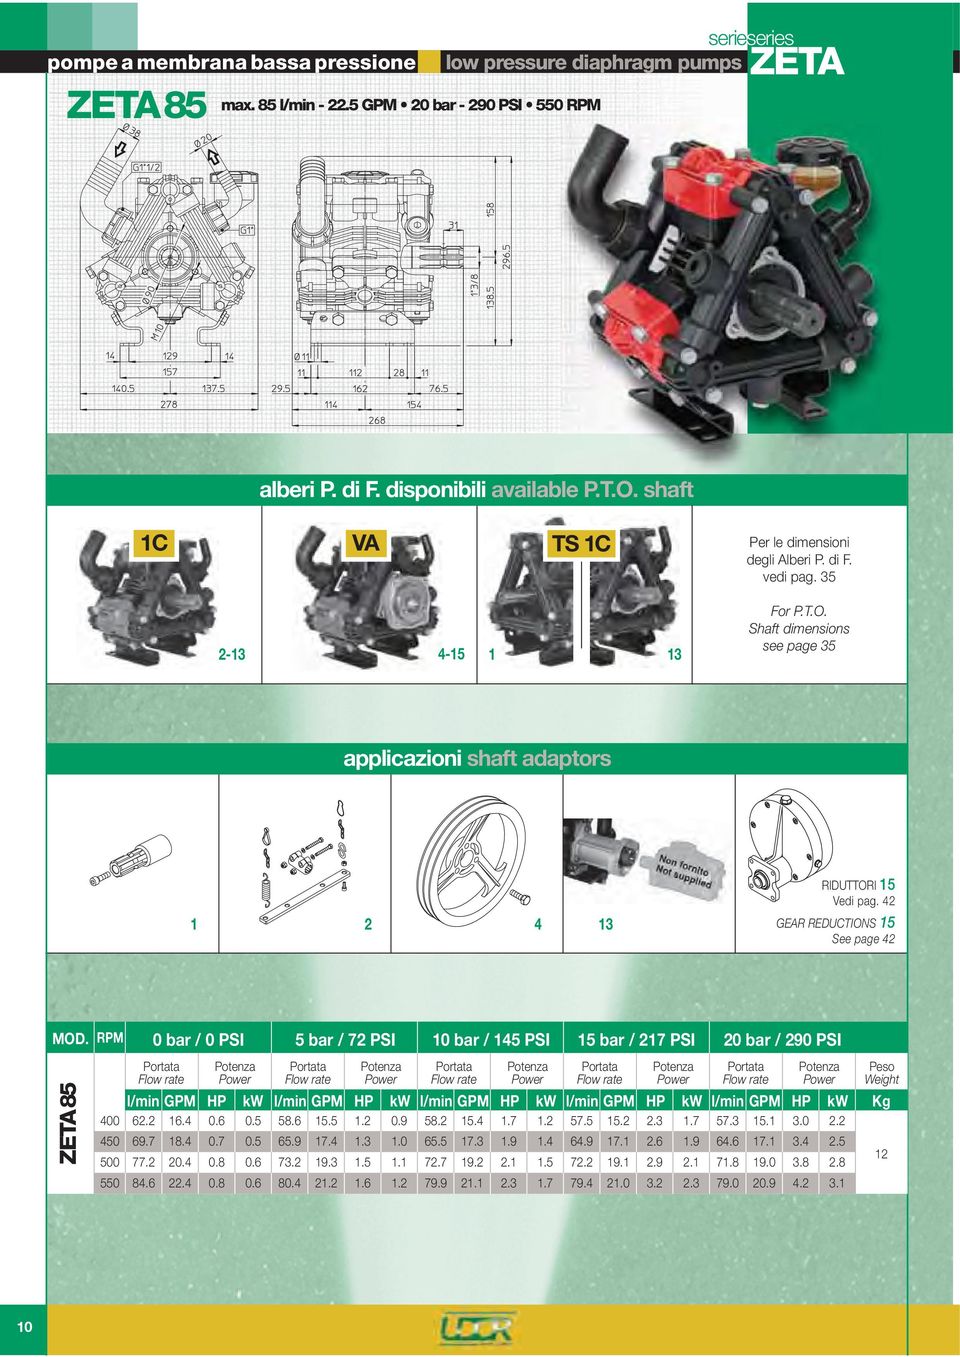 42 GEAR REDUCTIONS 15 See page 42 ZETA 85 0 bar / 0 PSI 5 bar / 72 PSI 10 bar / 145 PSI 15 bar / 217 PSI 20 bar / 290 PSI l/min GPM HP kw l/min GPM HP kw l/min GPM HP kw l/min GPM HP kw l/min GPM HP